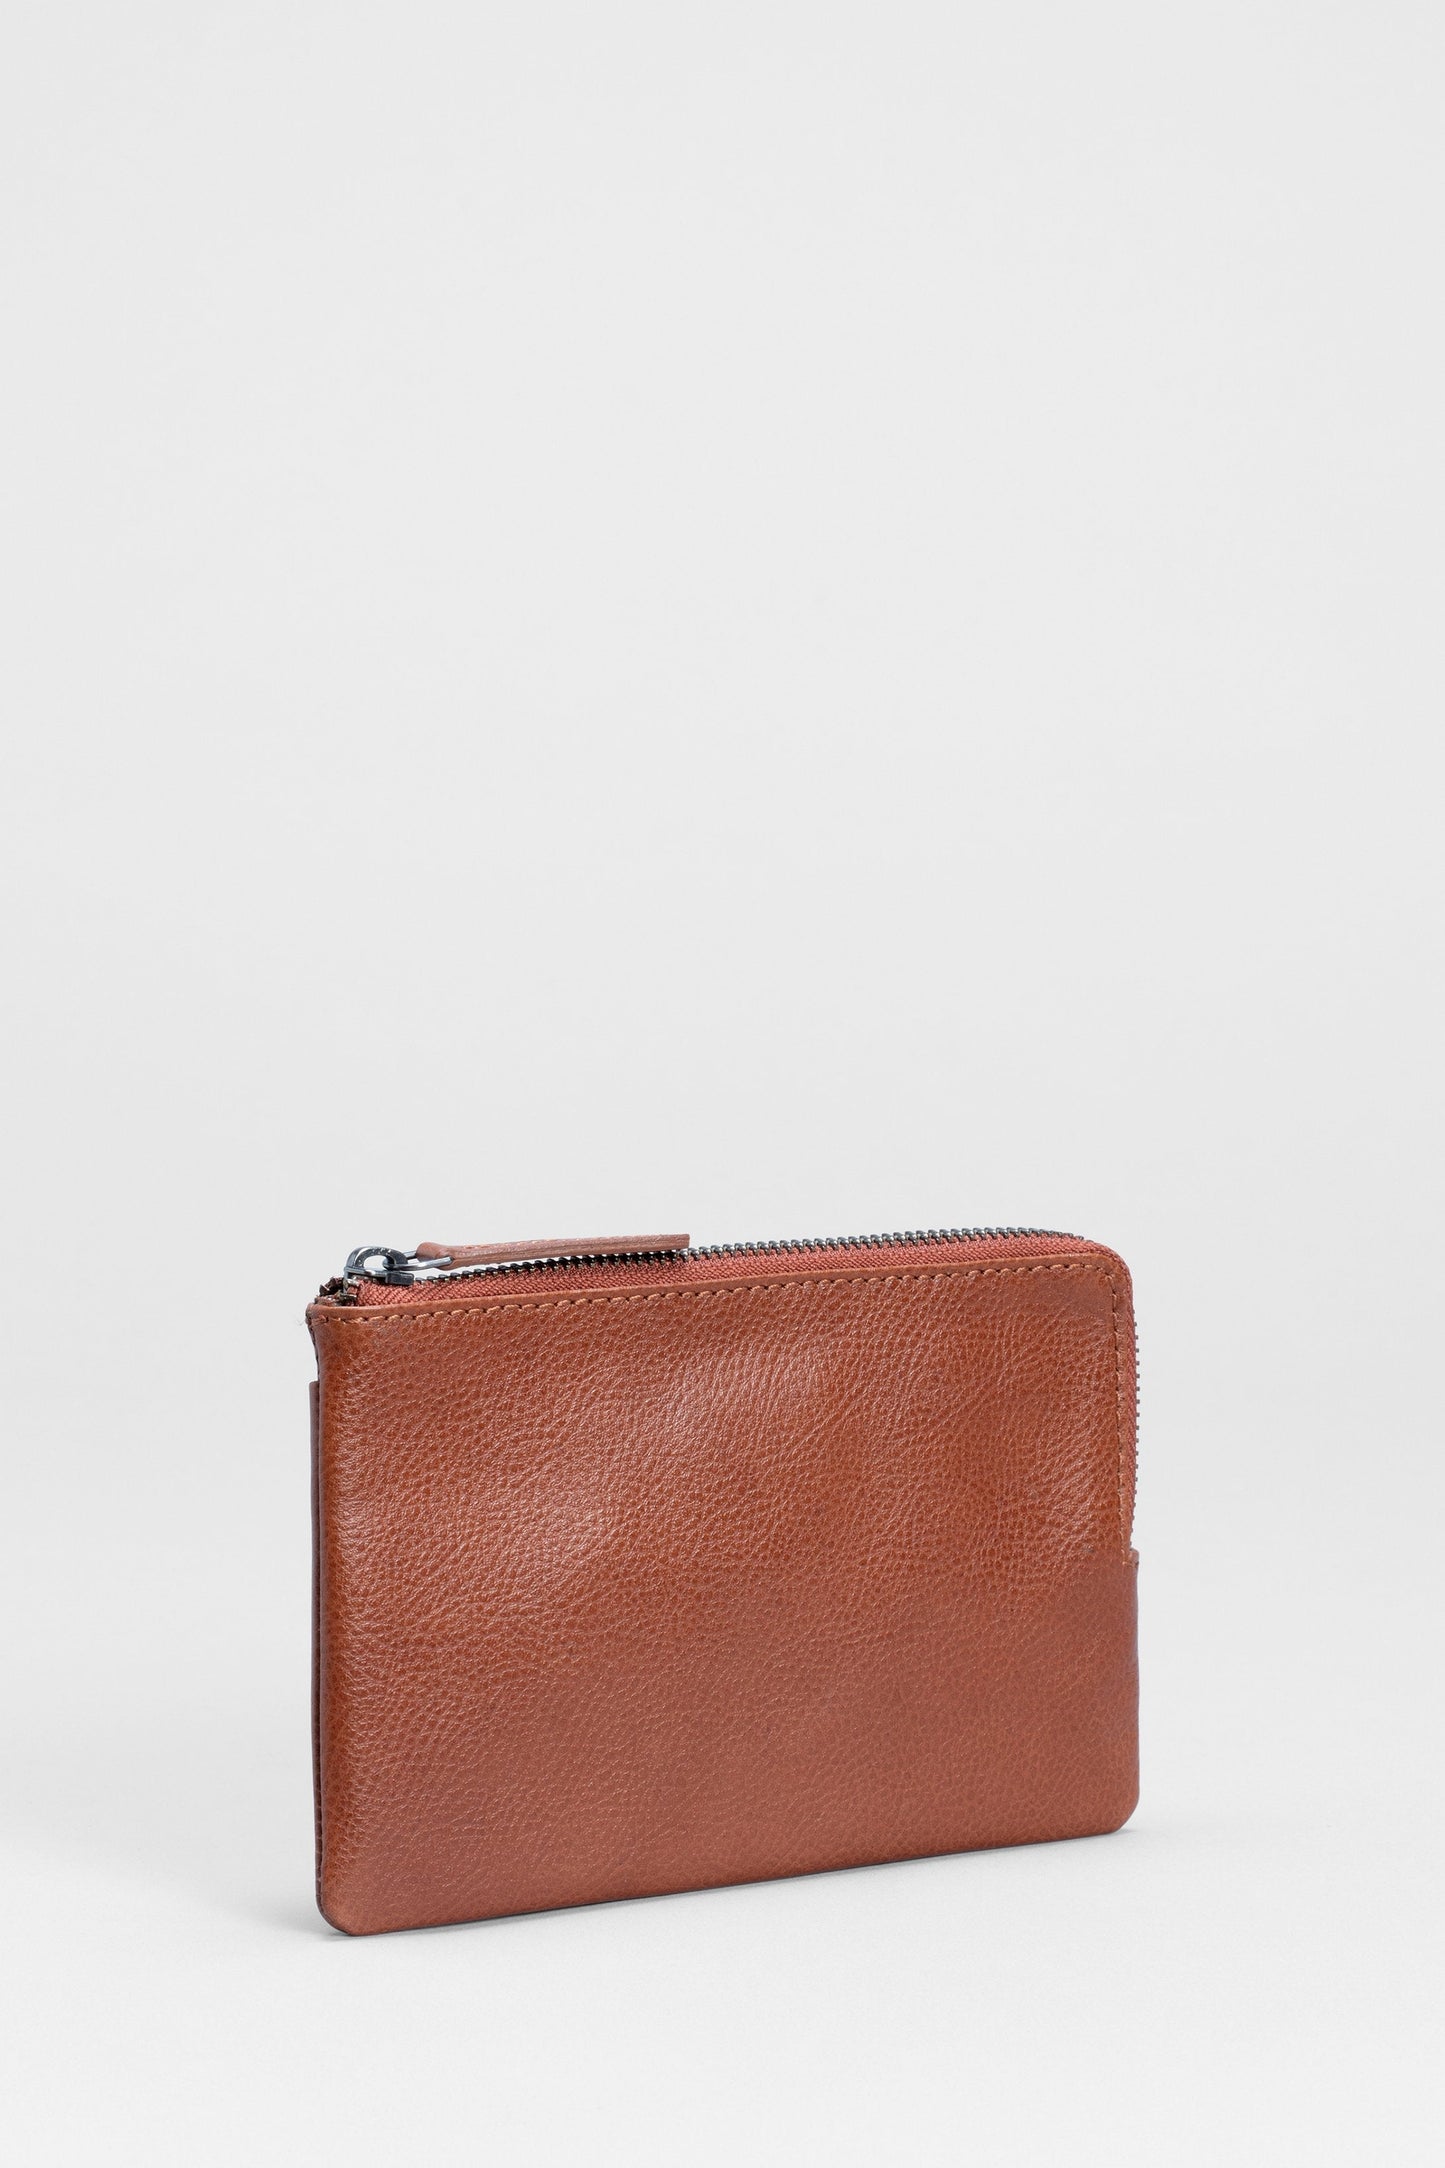 Kaia Zip Remnant Cow Leather Coin Purse Pouch Front | TEXTURED TAN